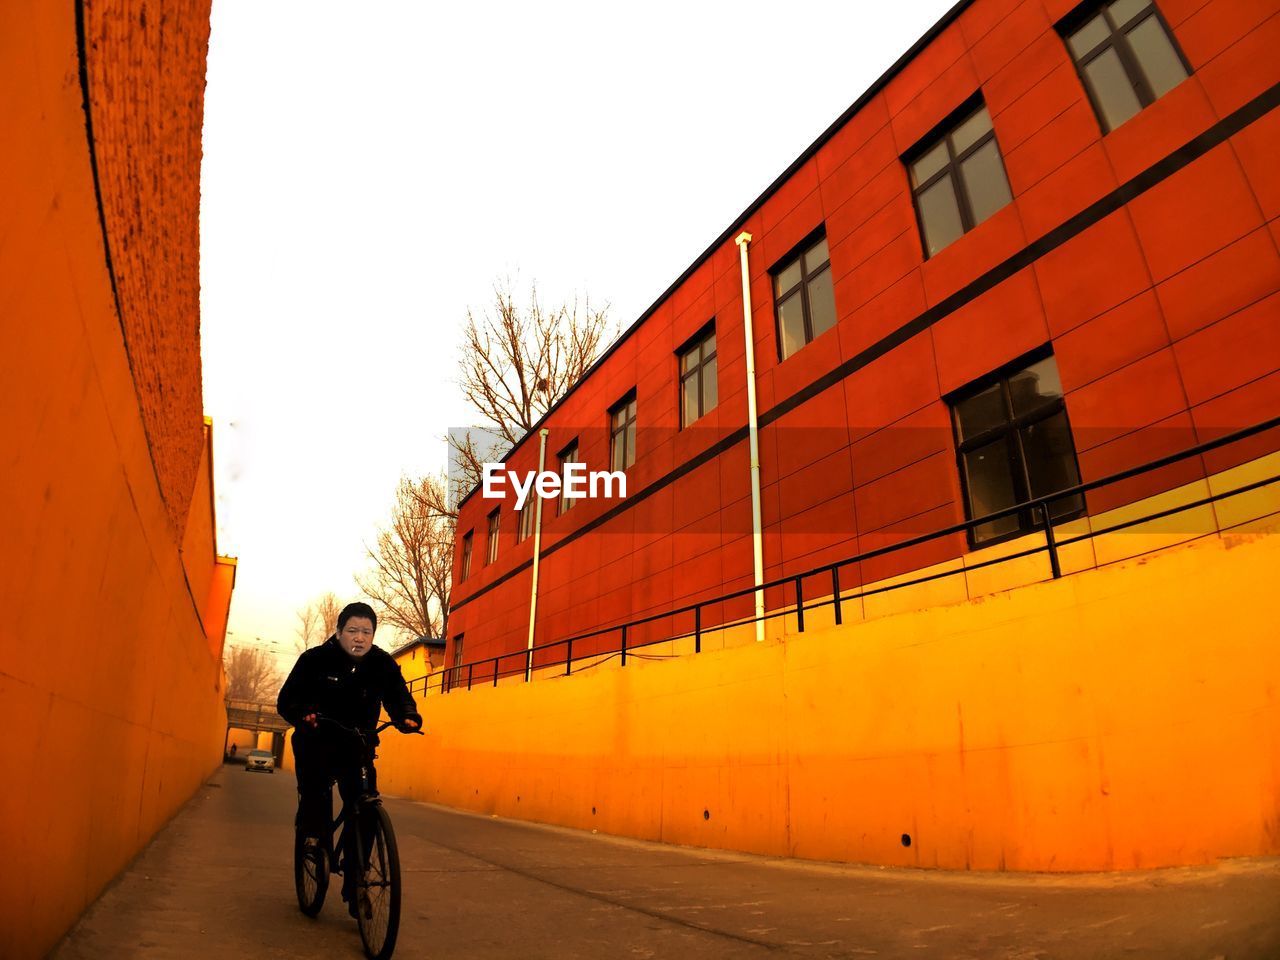 Man cycling on road amidst buildings